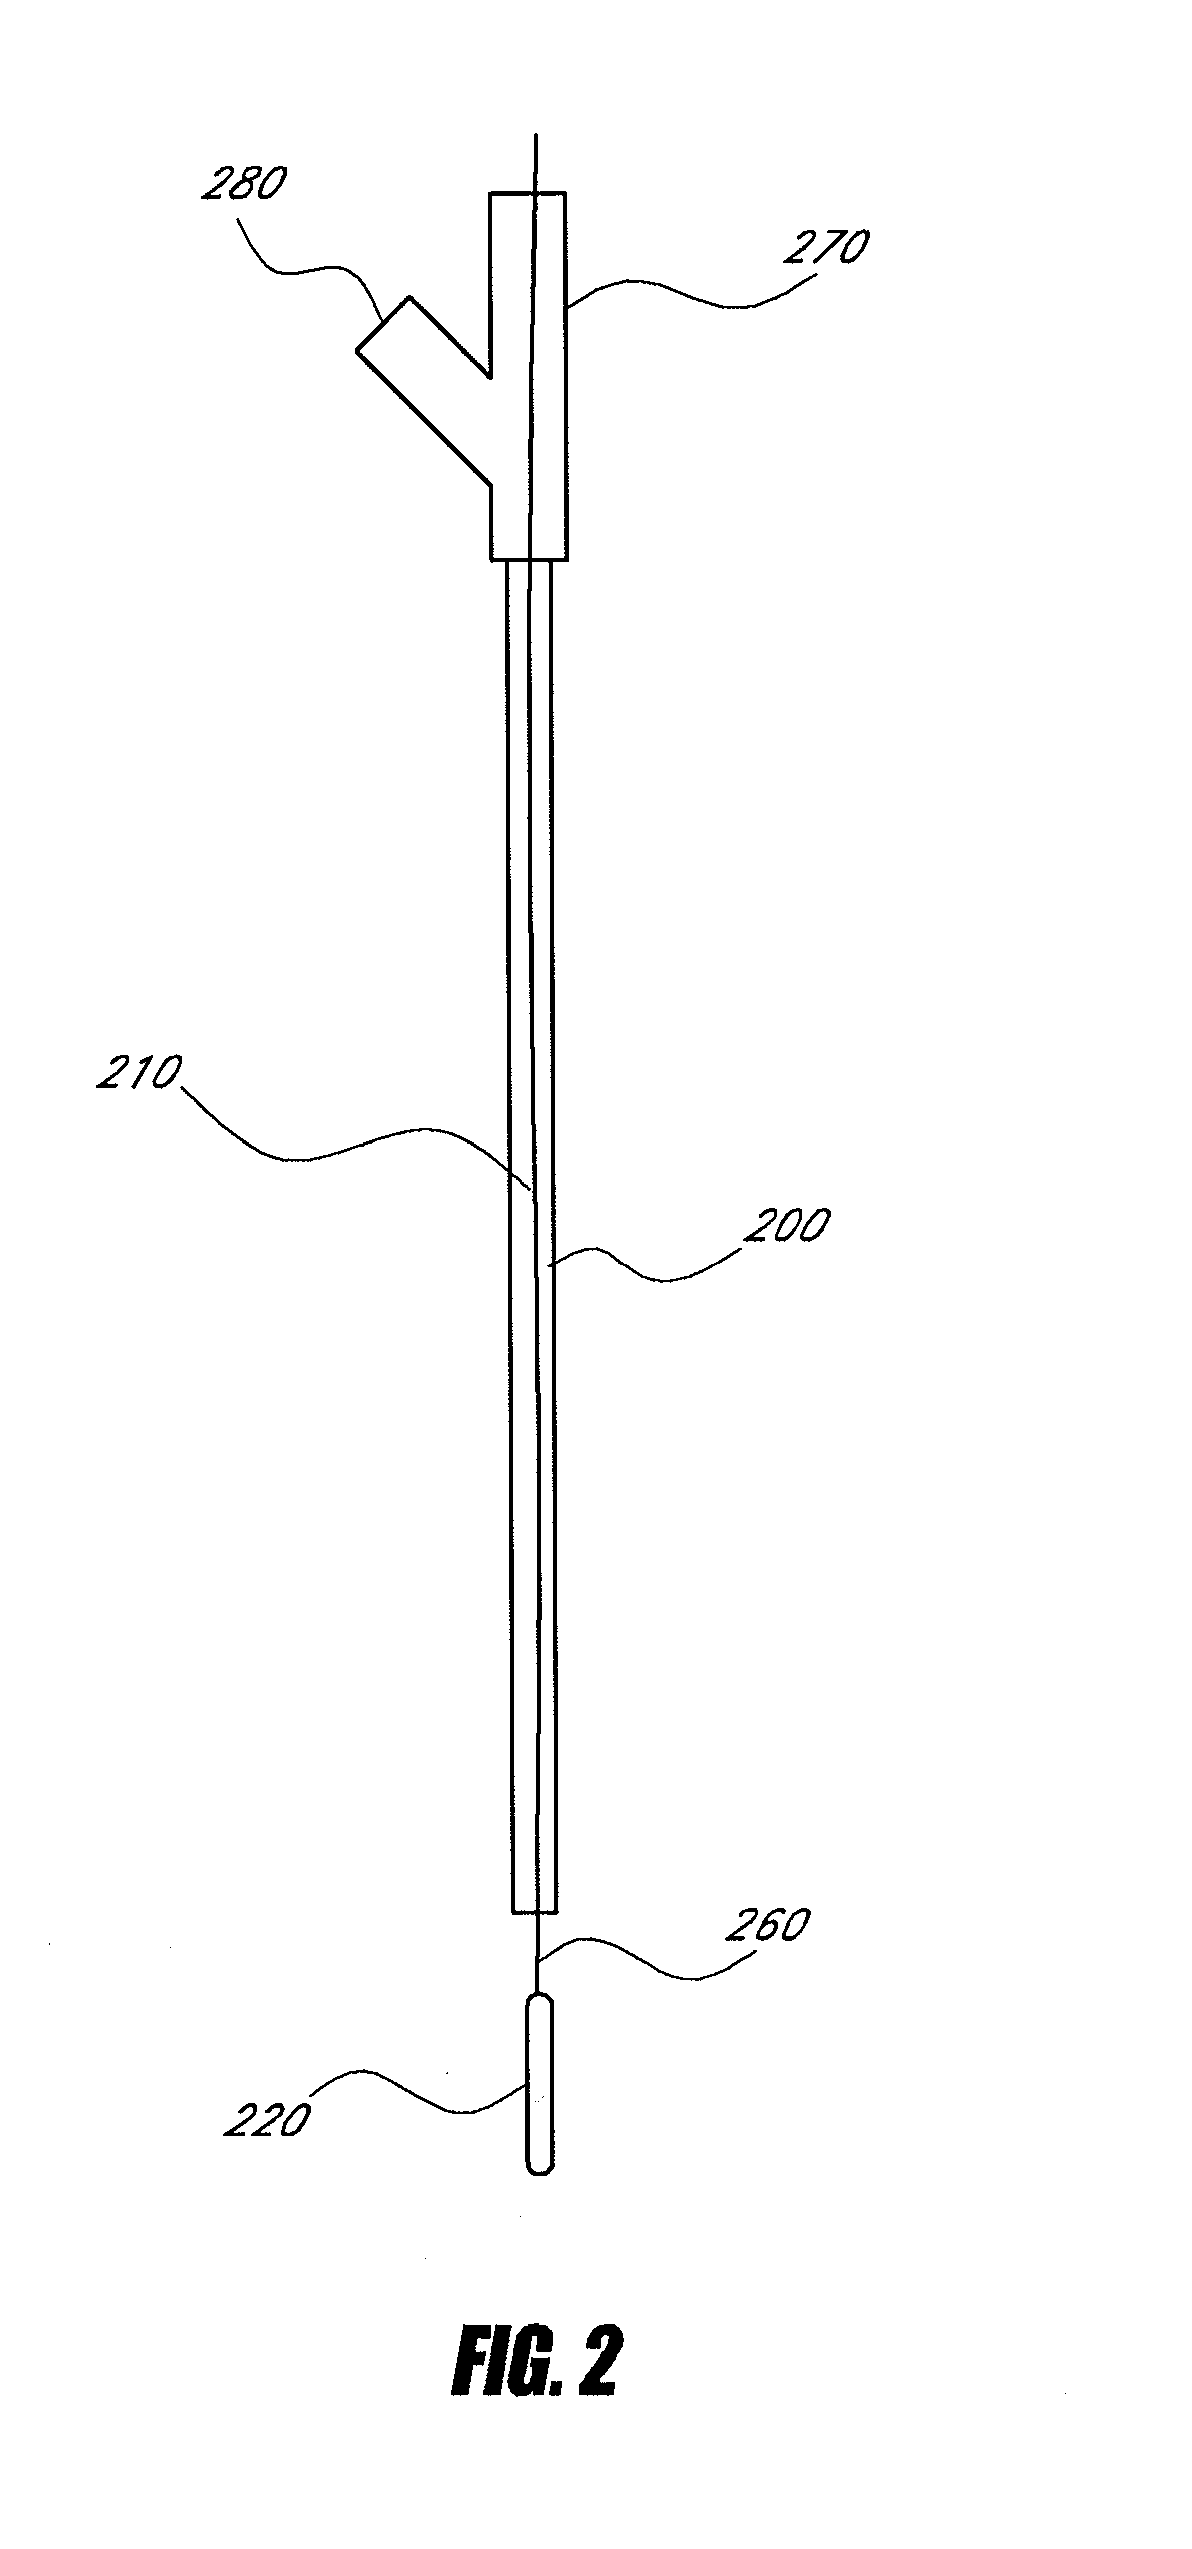 Device and method for accessing and treating ducts of mammary glands